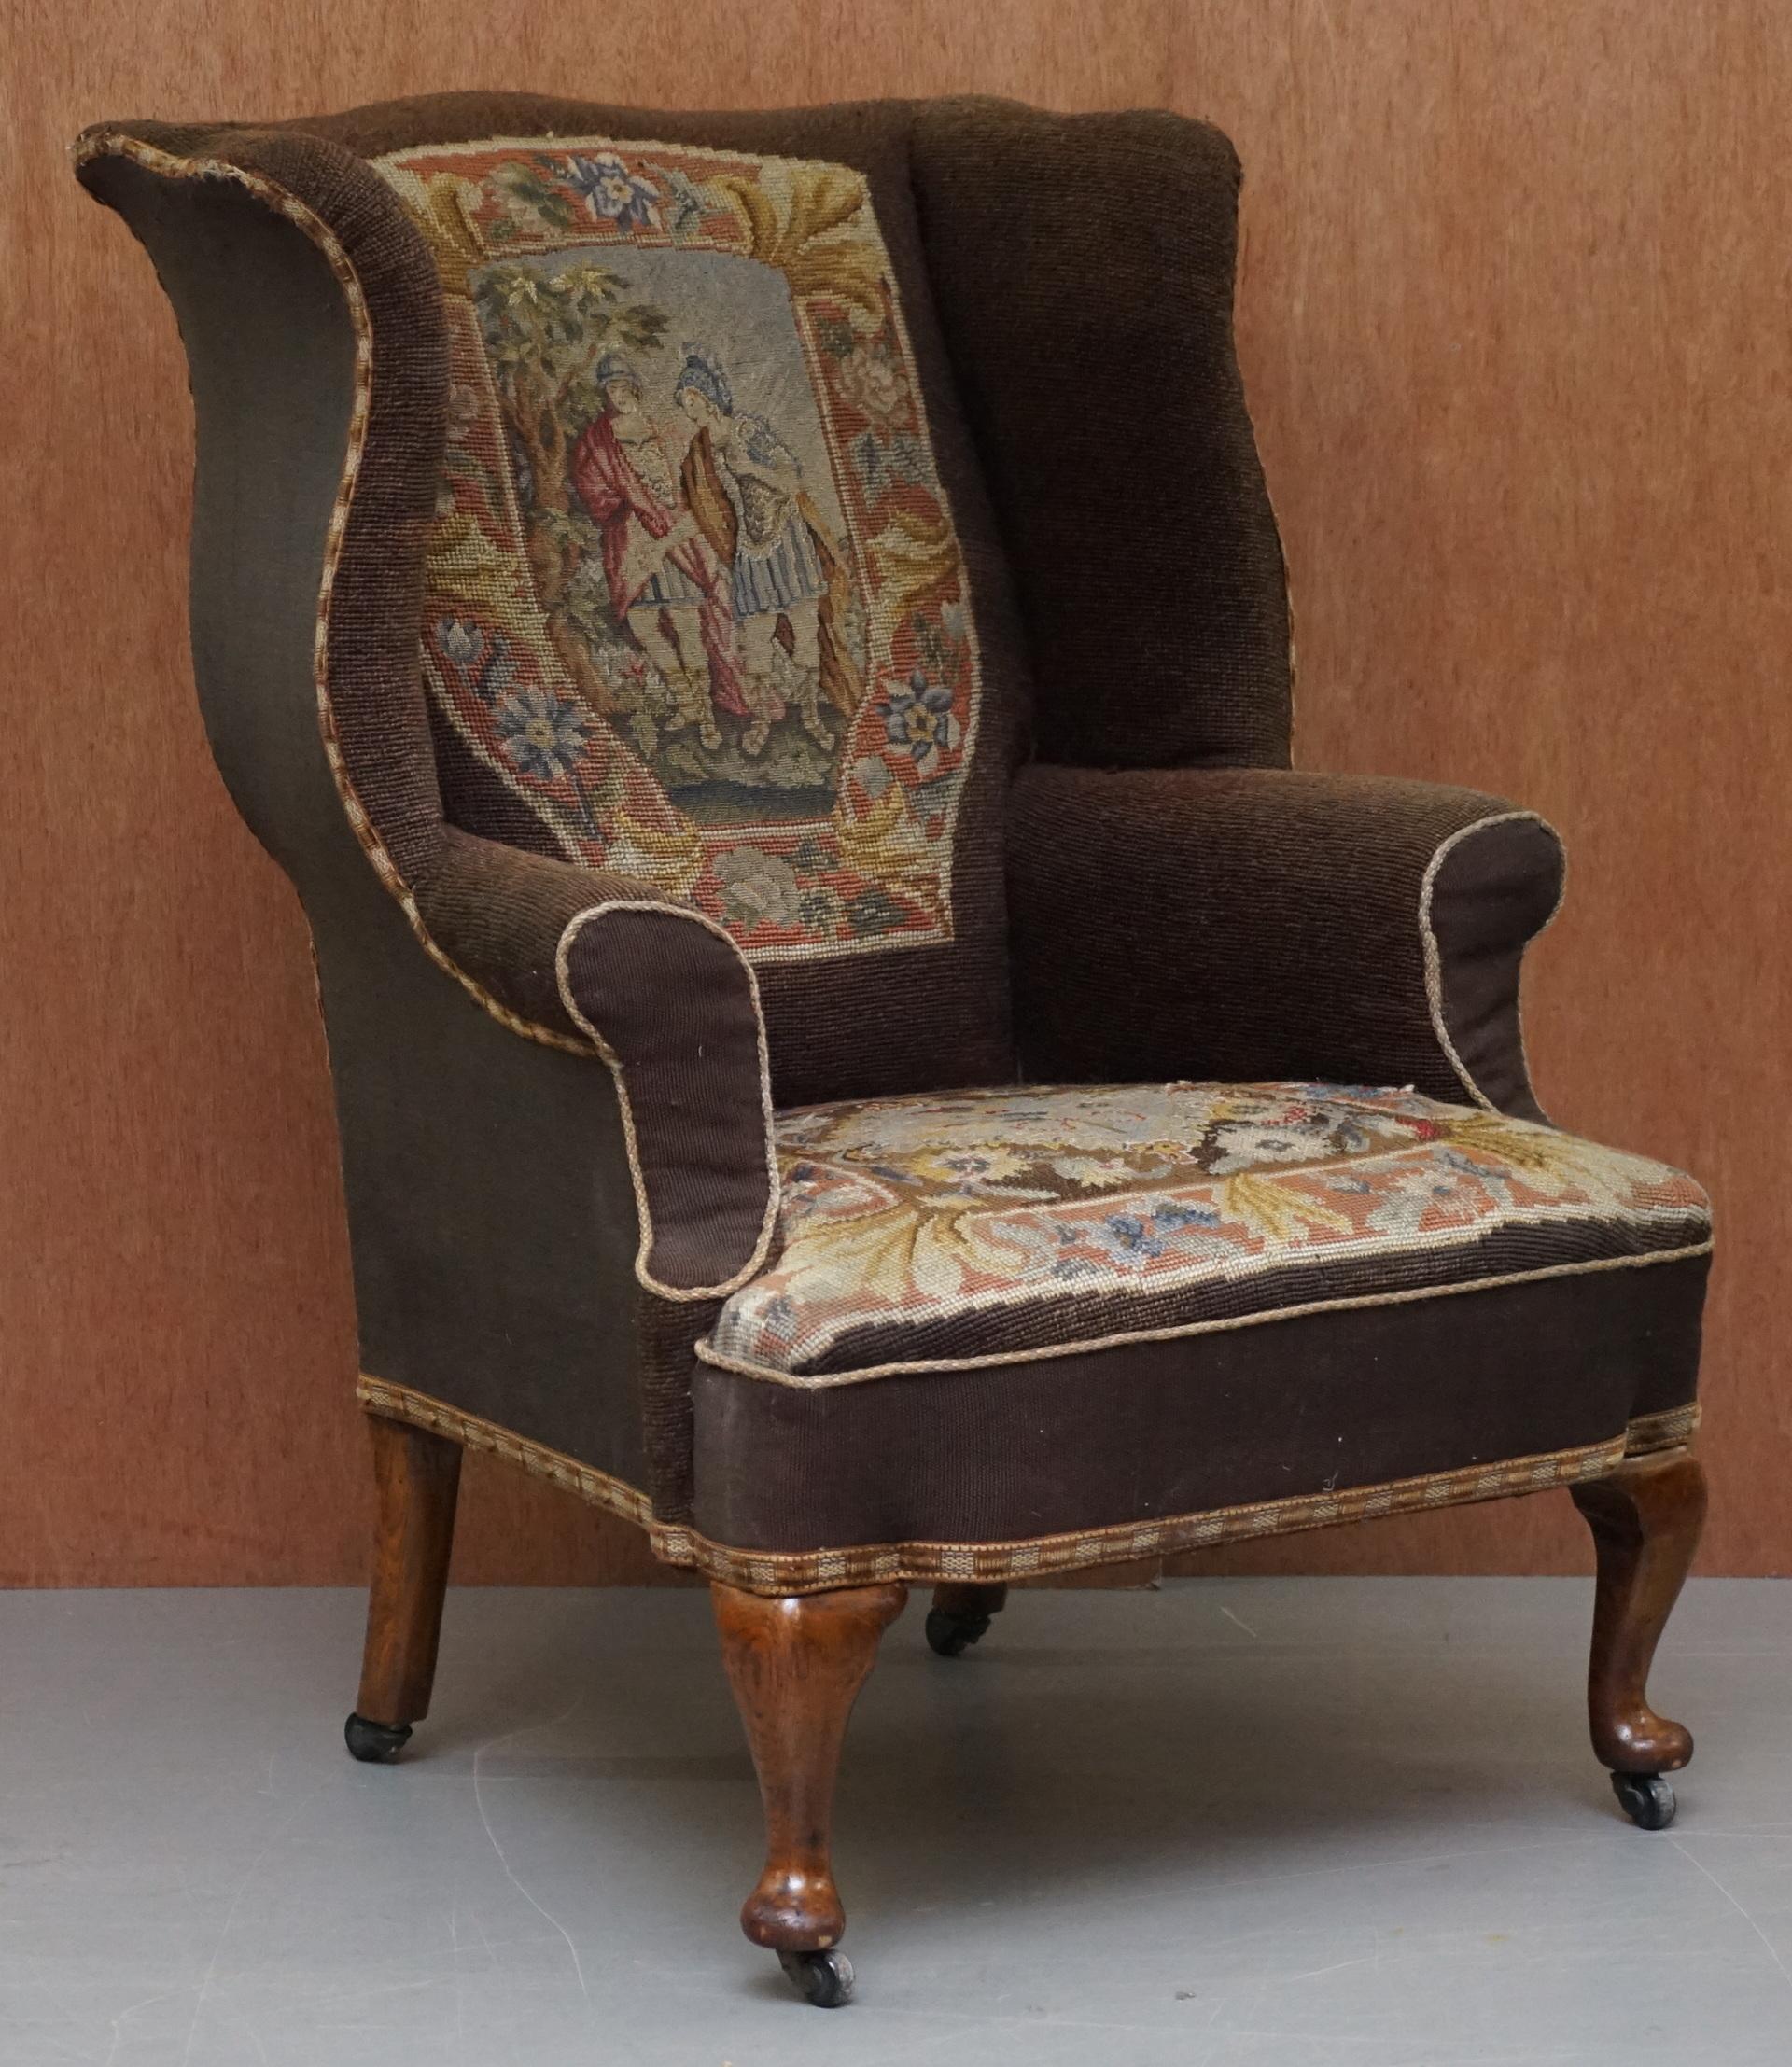 We are delighted to offer for sale this rather lovely original early Victorian English oak and embroidered wingback armchair

A very early and original wingback armchair, the embroidery is period, these pieces were decorated by elegant Victorian